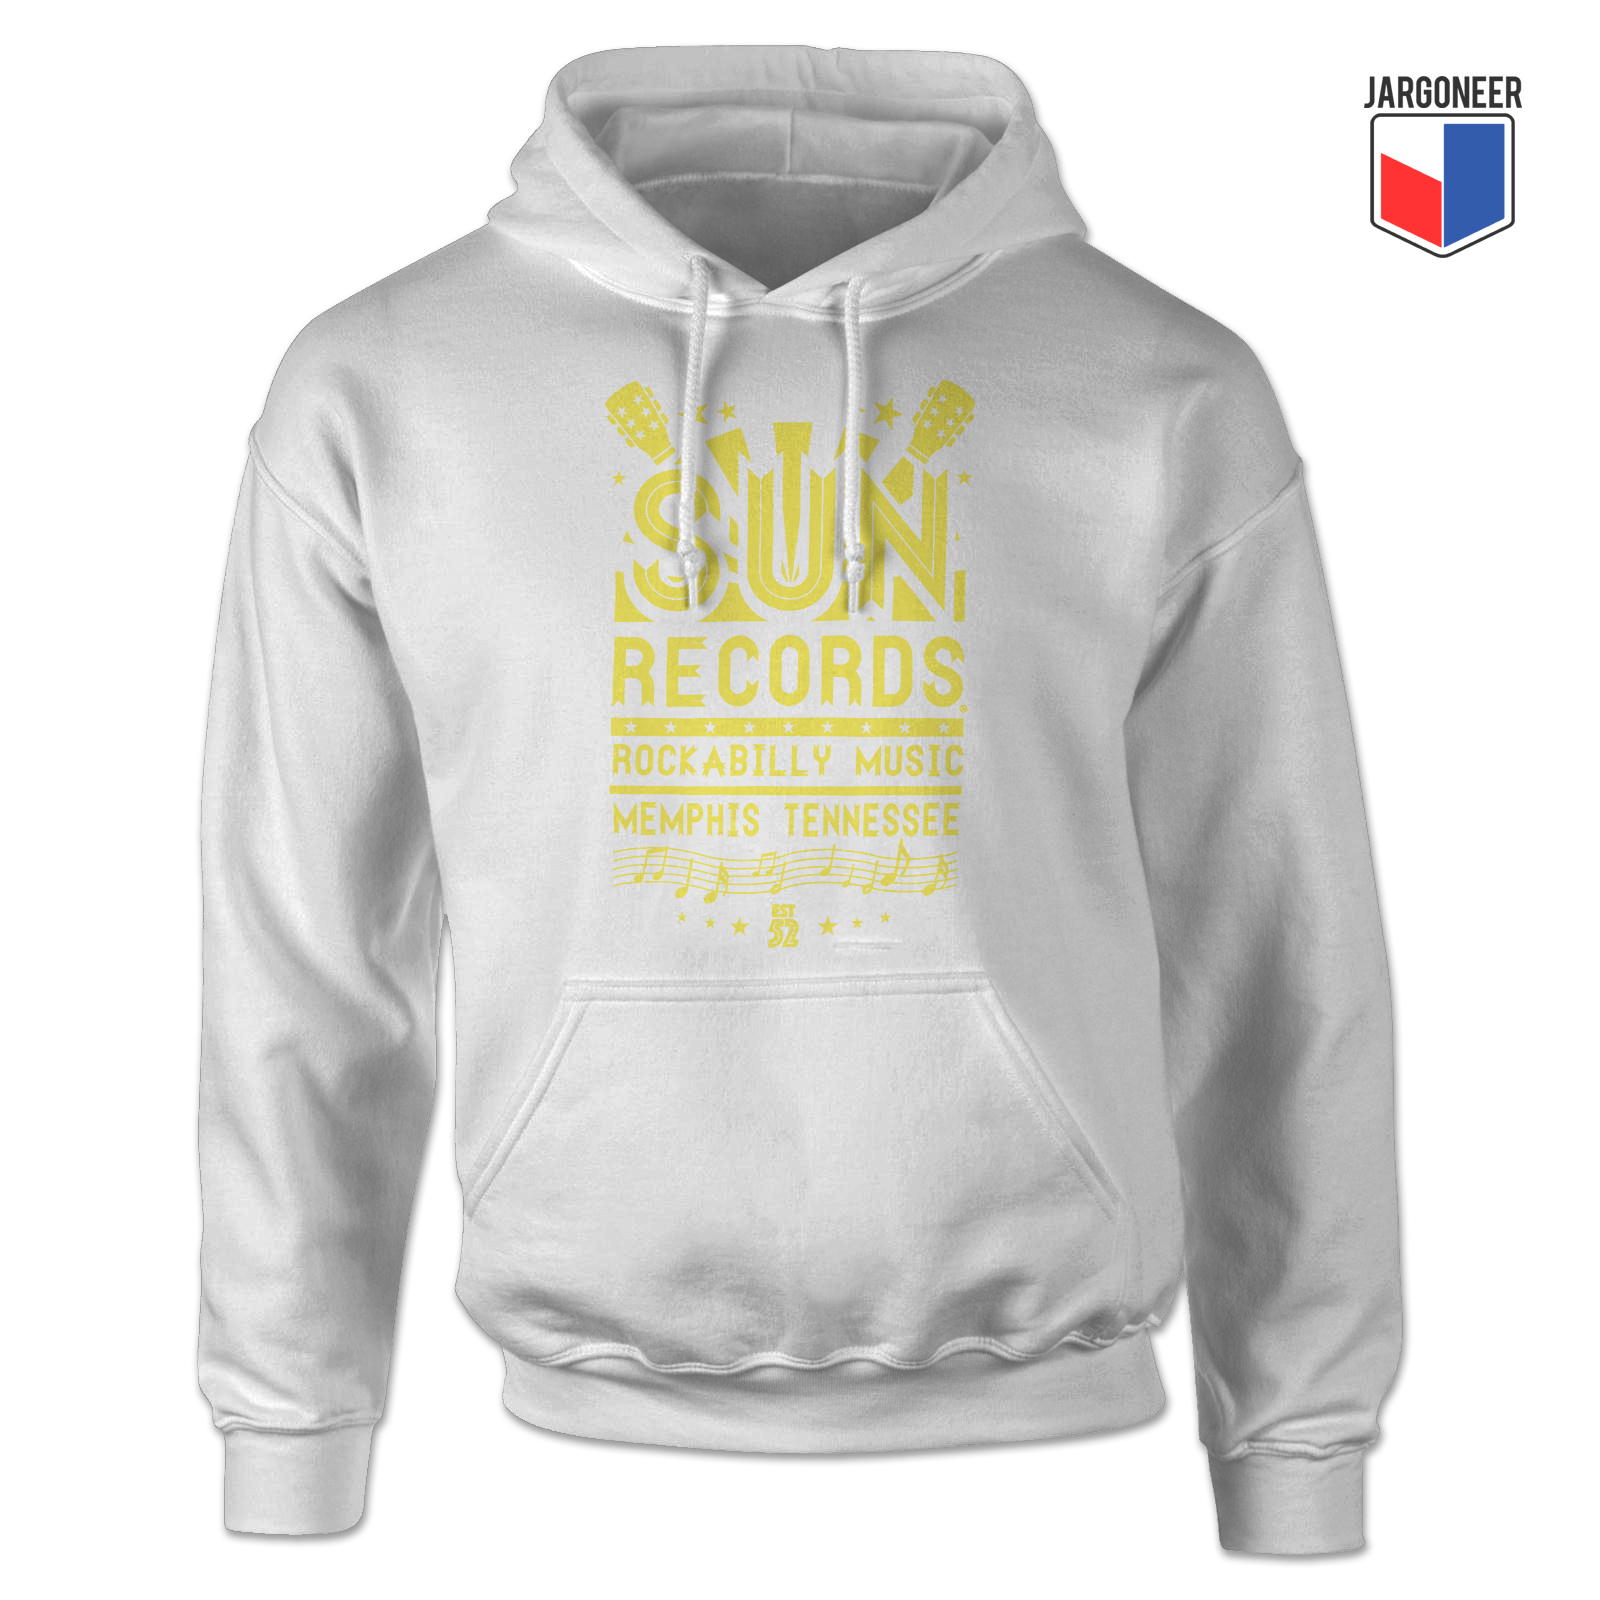 Sun Records Rockabilly Music White Hoody - Shop Unique Graphic Cool Shirt Designs